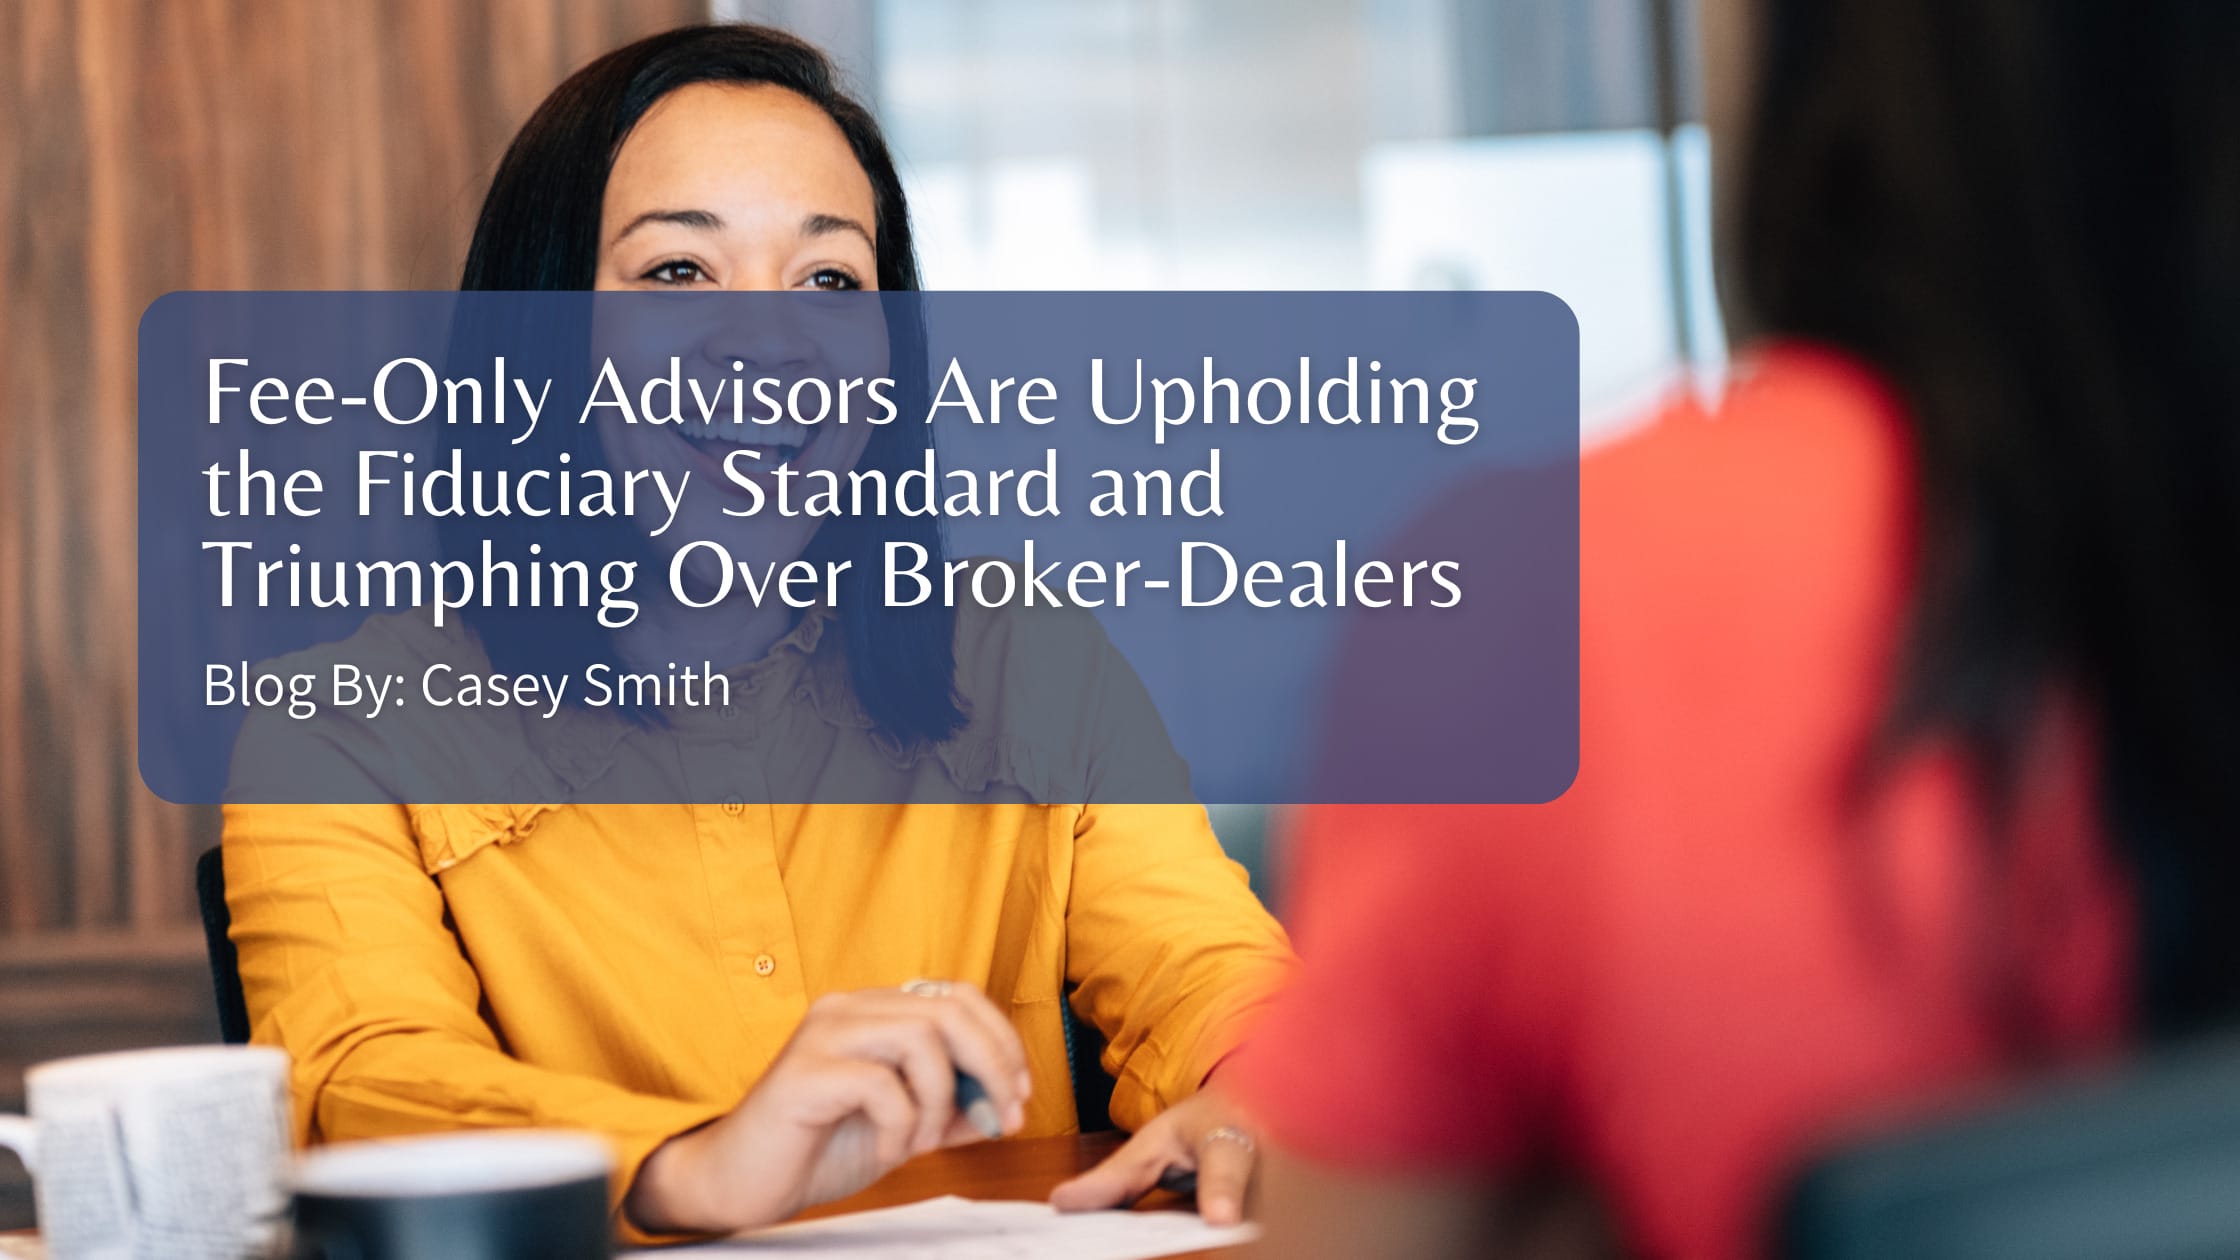 Fee-Only Advisors Are Upholding the Fiduciary Standard and Triumphing Over Broker-Dealers